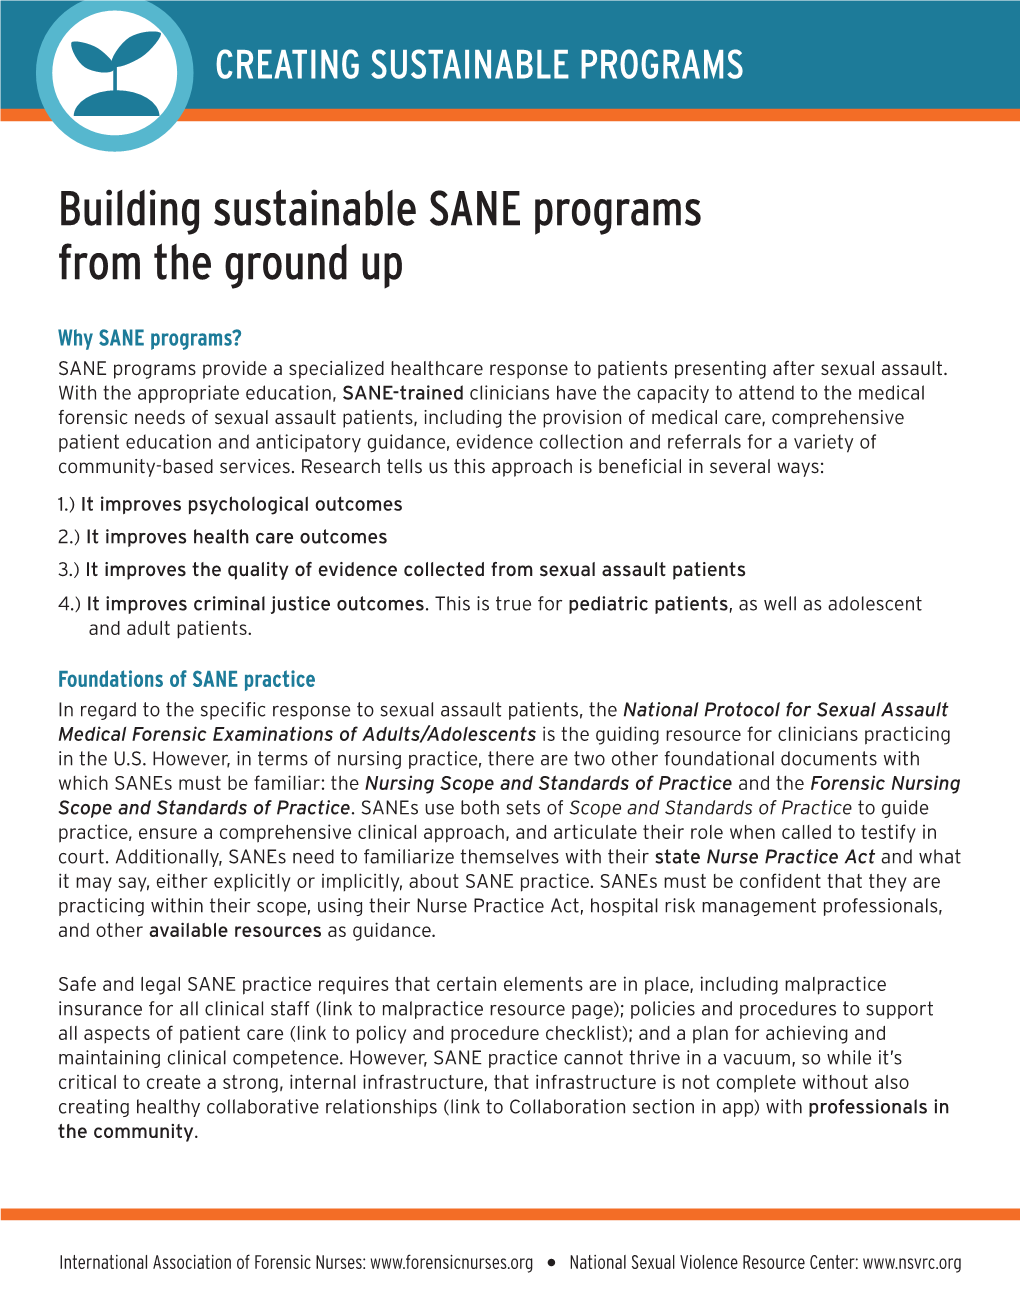 Building Sustainable SANE Programs from the Ground Up